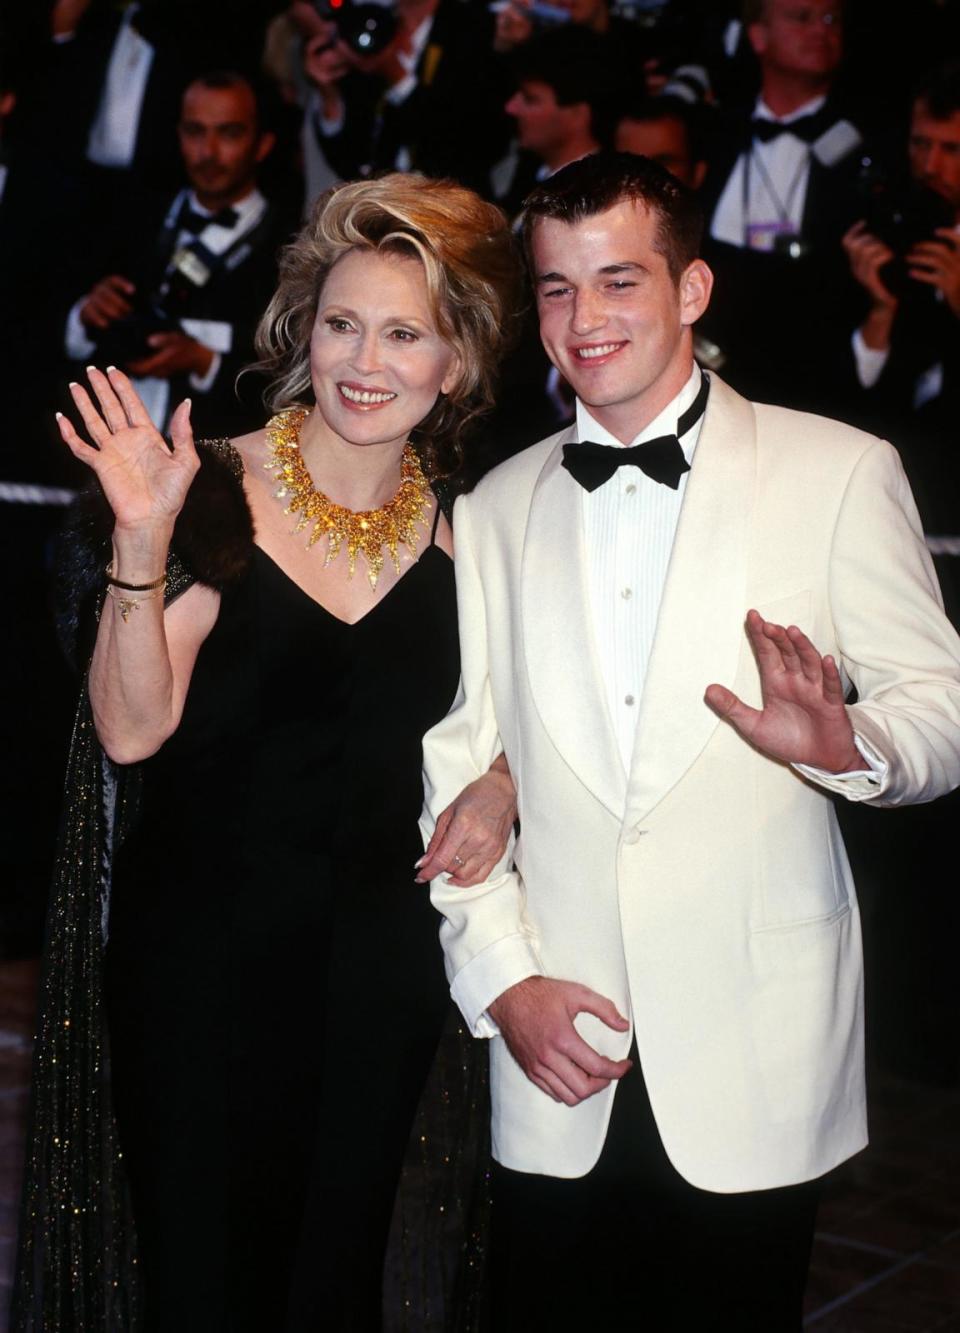 PHOTO: In this May of 1999 file photo, Faye Dunaway and her son Liam O'Neil attend the 52th Cannes Film Festival in Cannes, France.  (Foc Kan/WireImage via Getty Images)